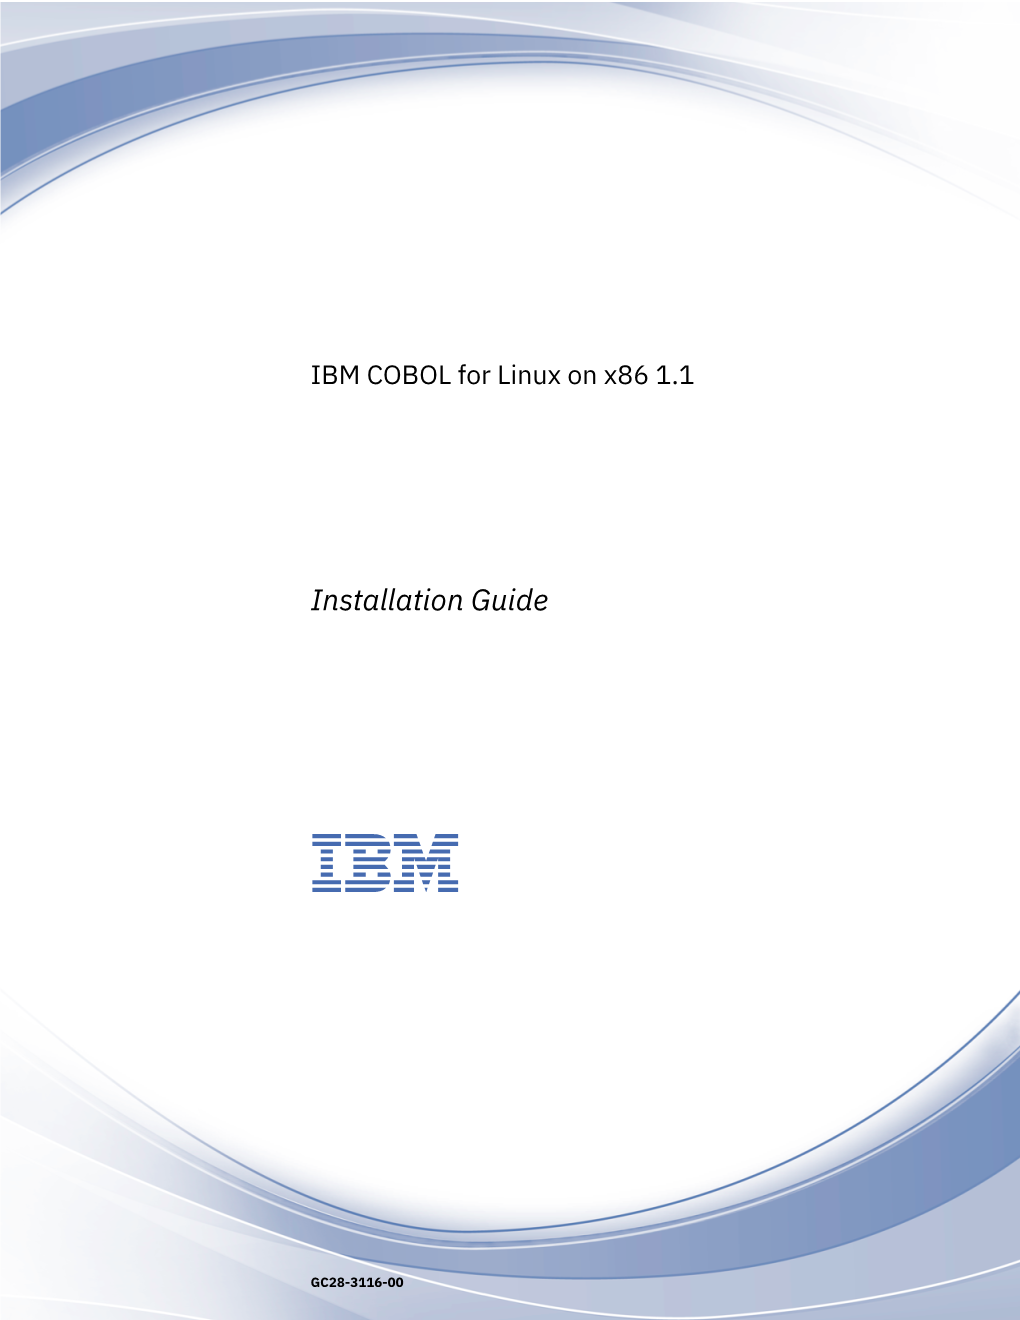 IBM COBOL for Linux on X86 1.1: Installation Guide Chapter 1